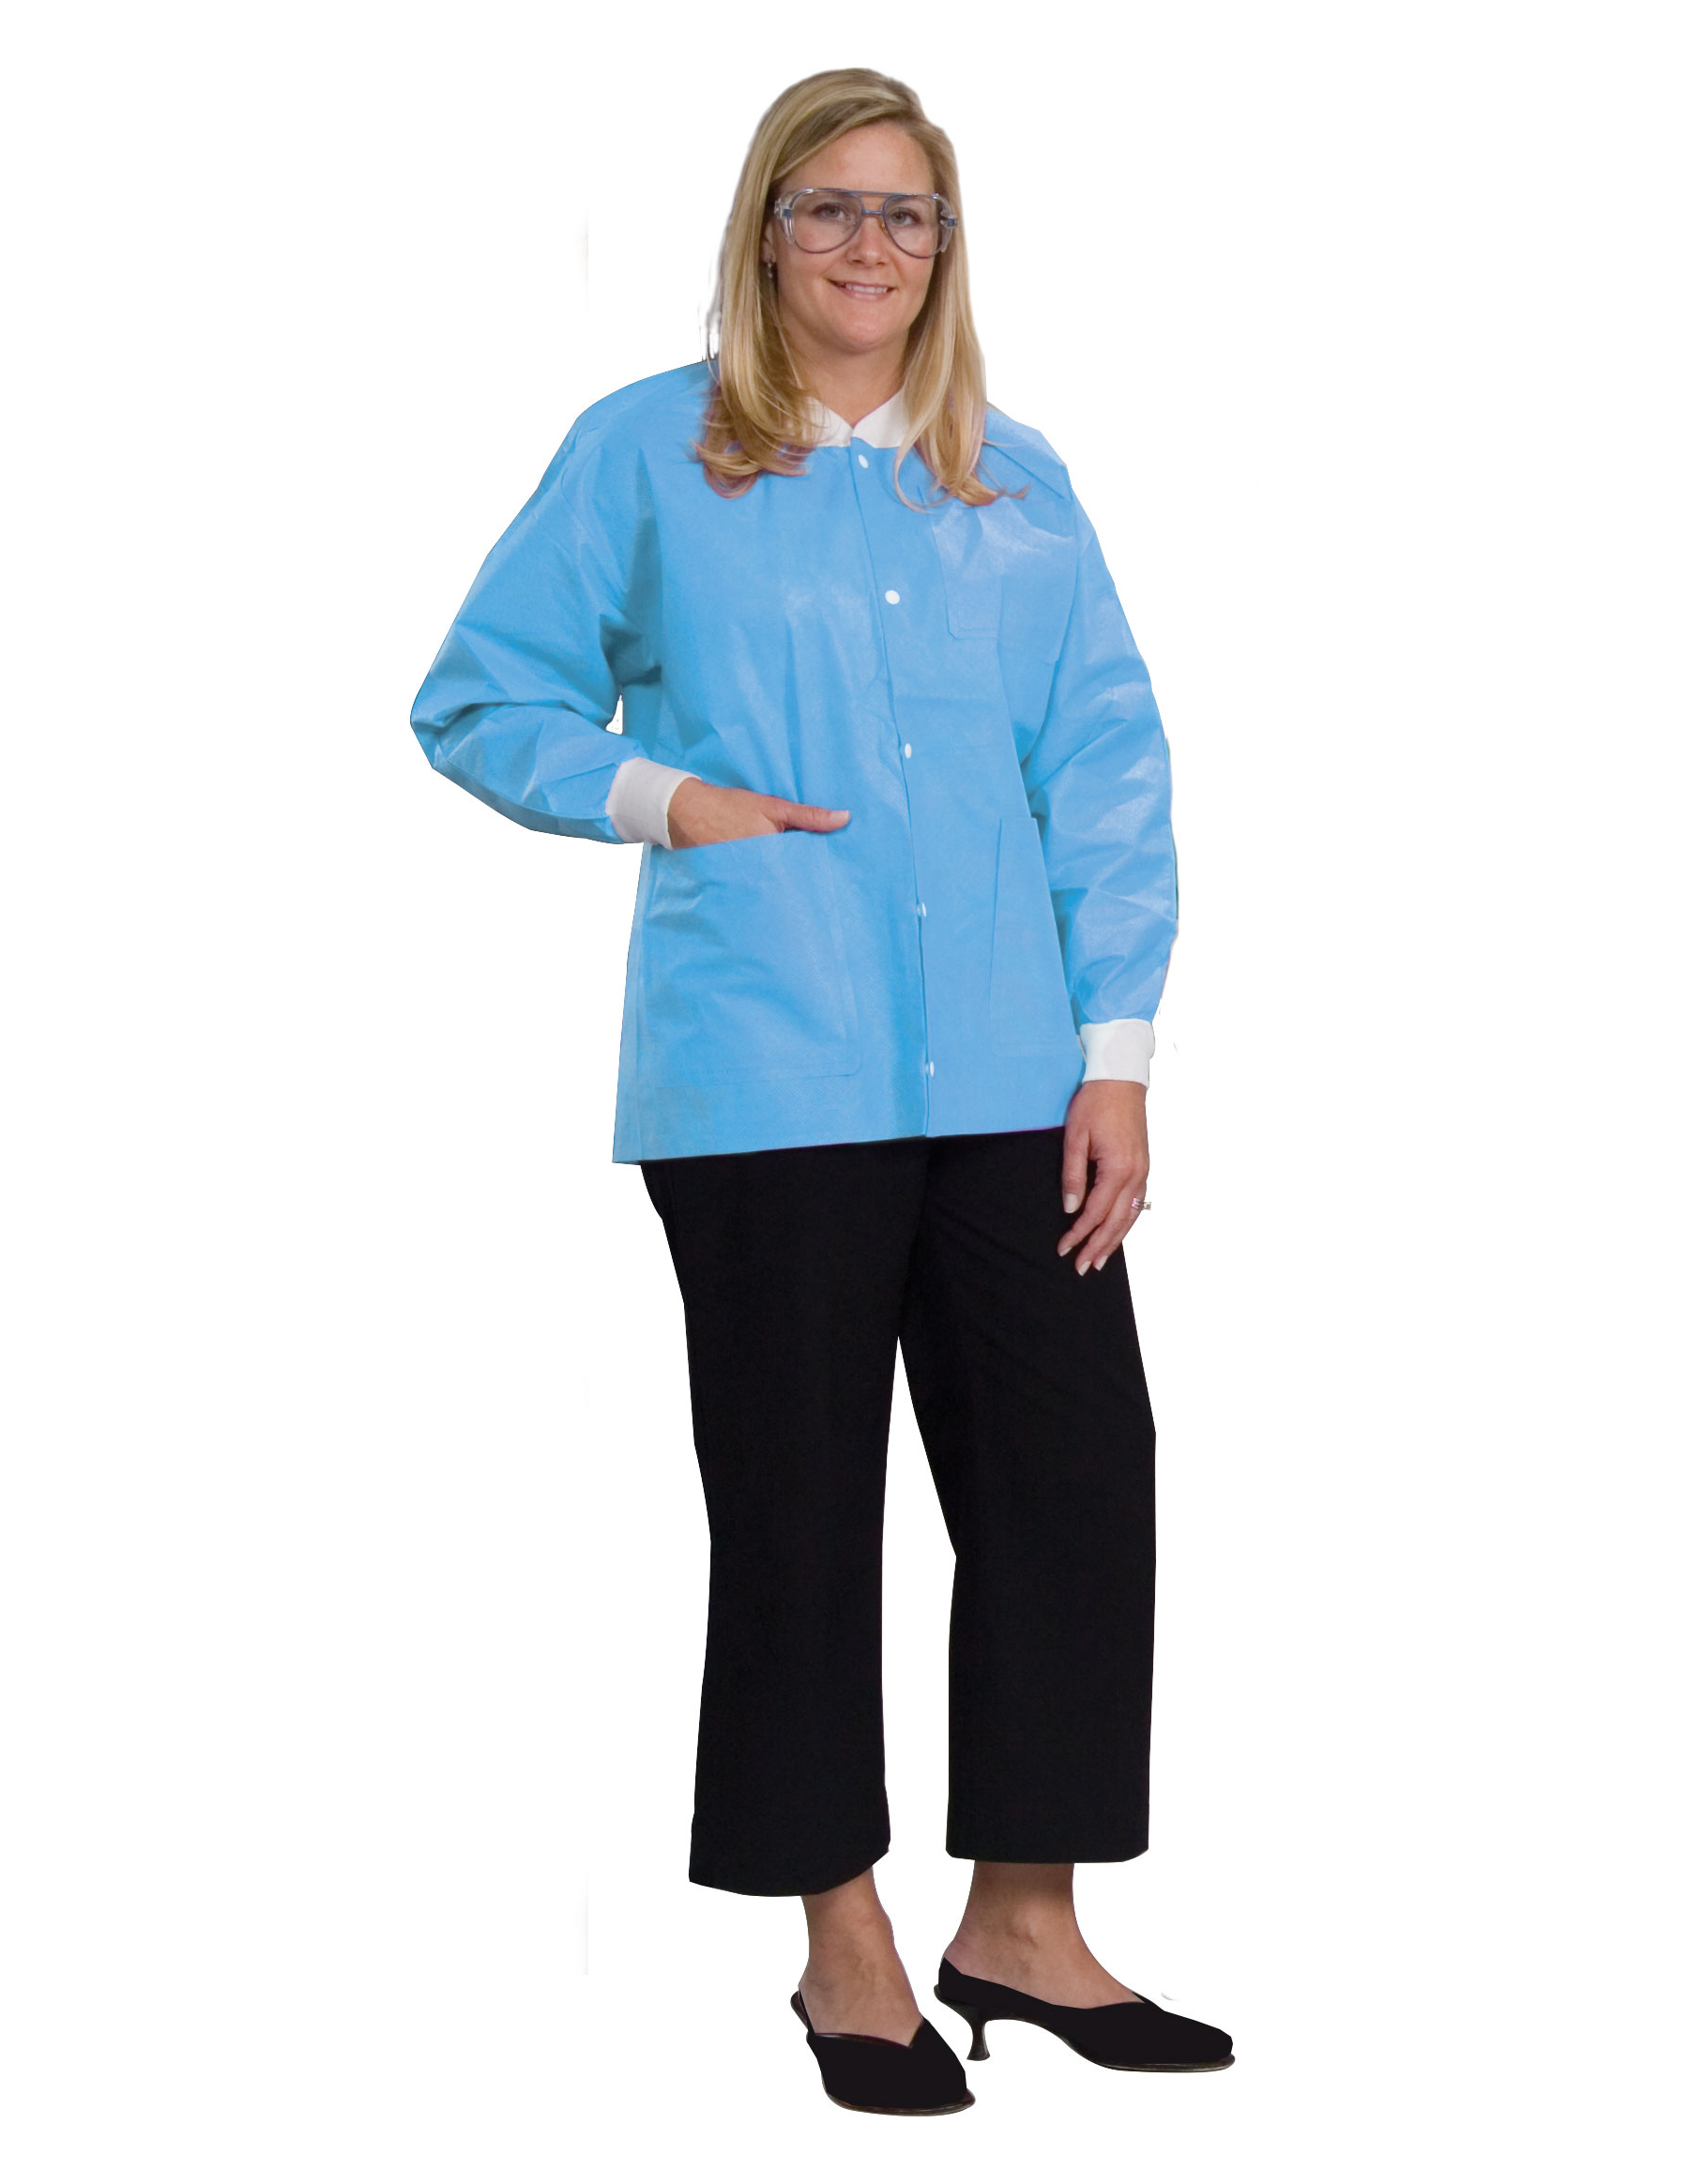 DenLine "In Stock" Disposable Mid-Length Lab Jacket Styles